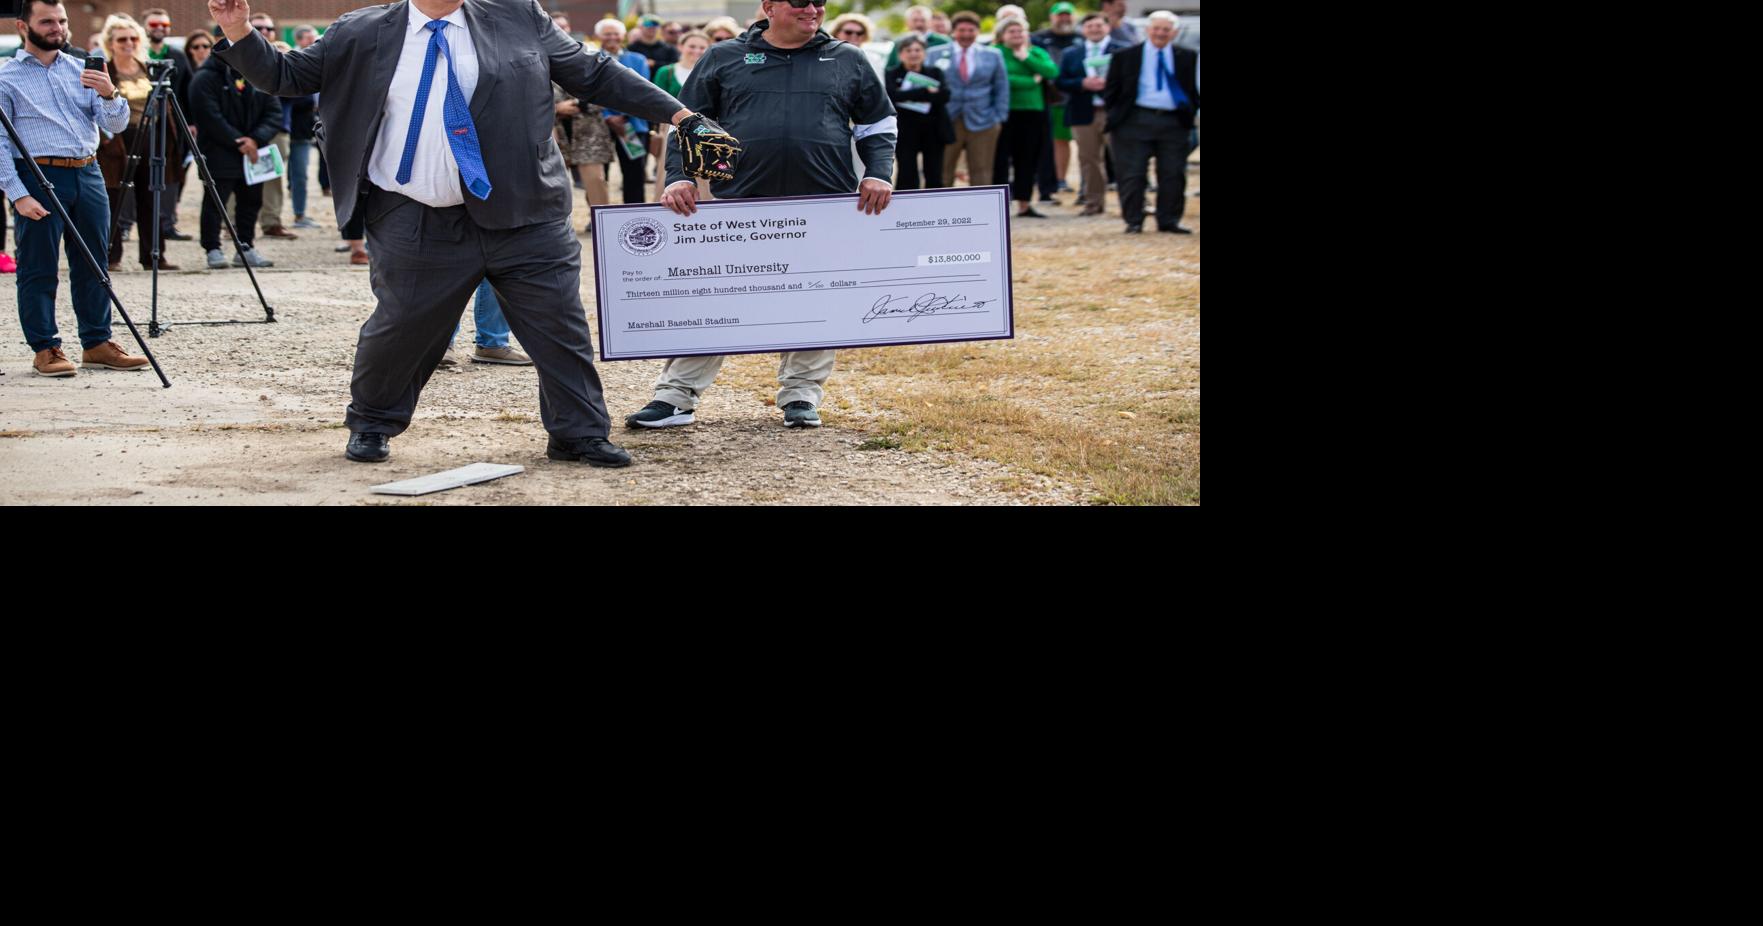 Governor’s Office-controlled fund containing unspent CARES Act money paid $10M for Marshall baseball stadium project